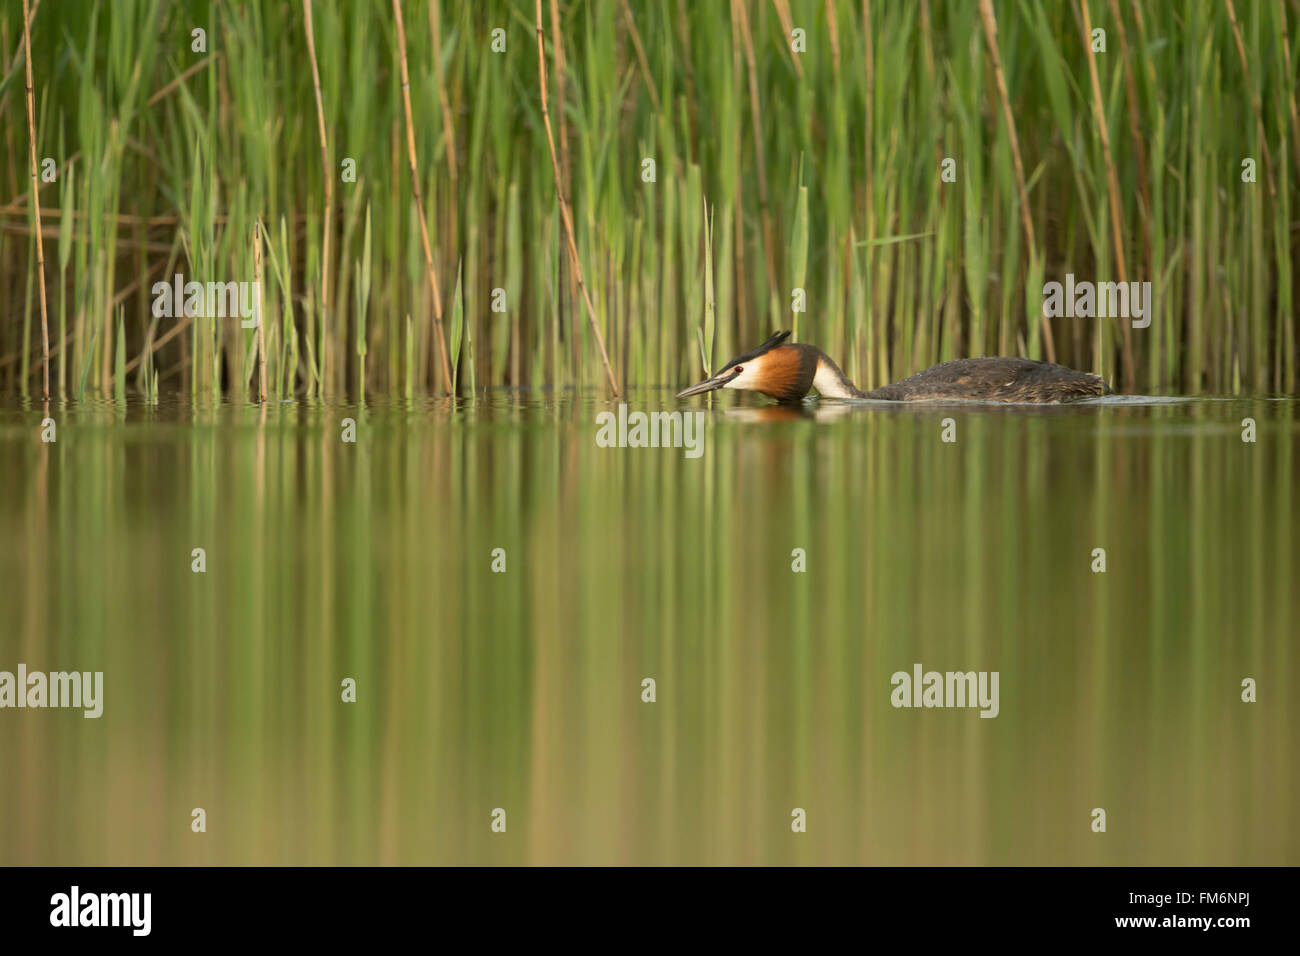 Great Crested Grebe ( Podiceps cristatus ) swims in stretched posture along a green reed belt, calm water, nice reflections. Stock Photo